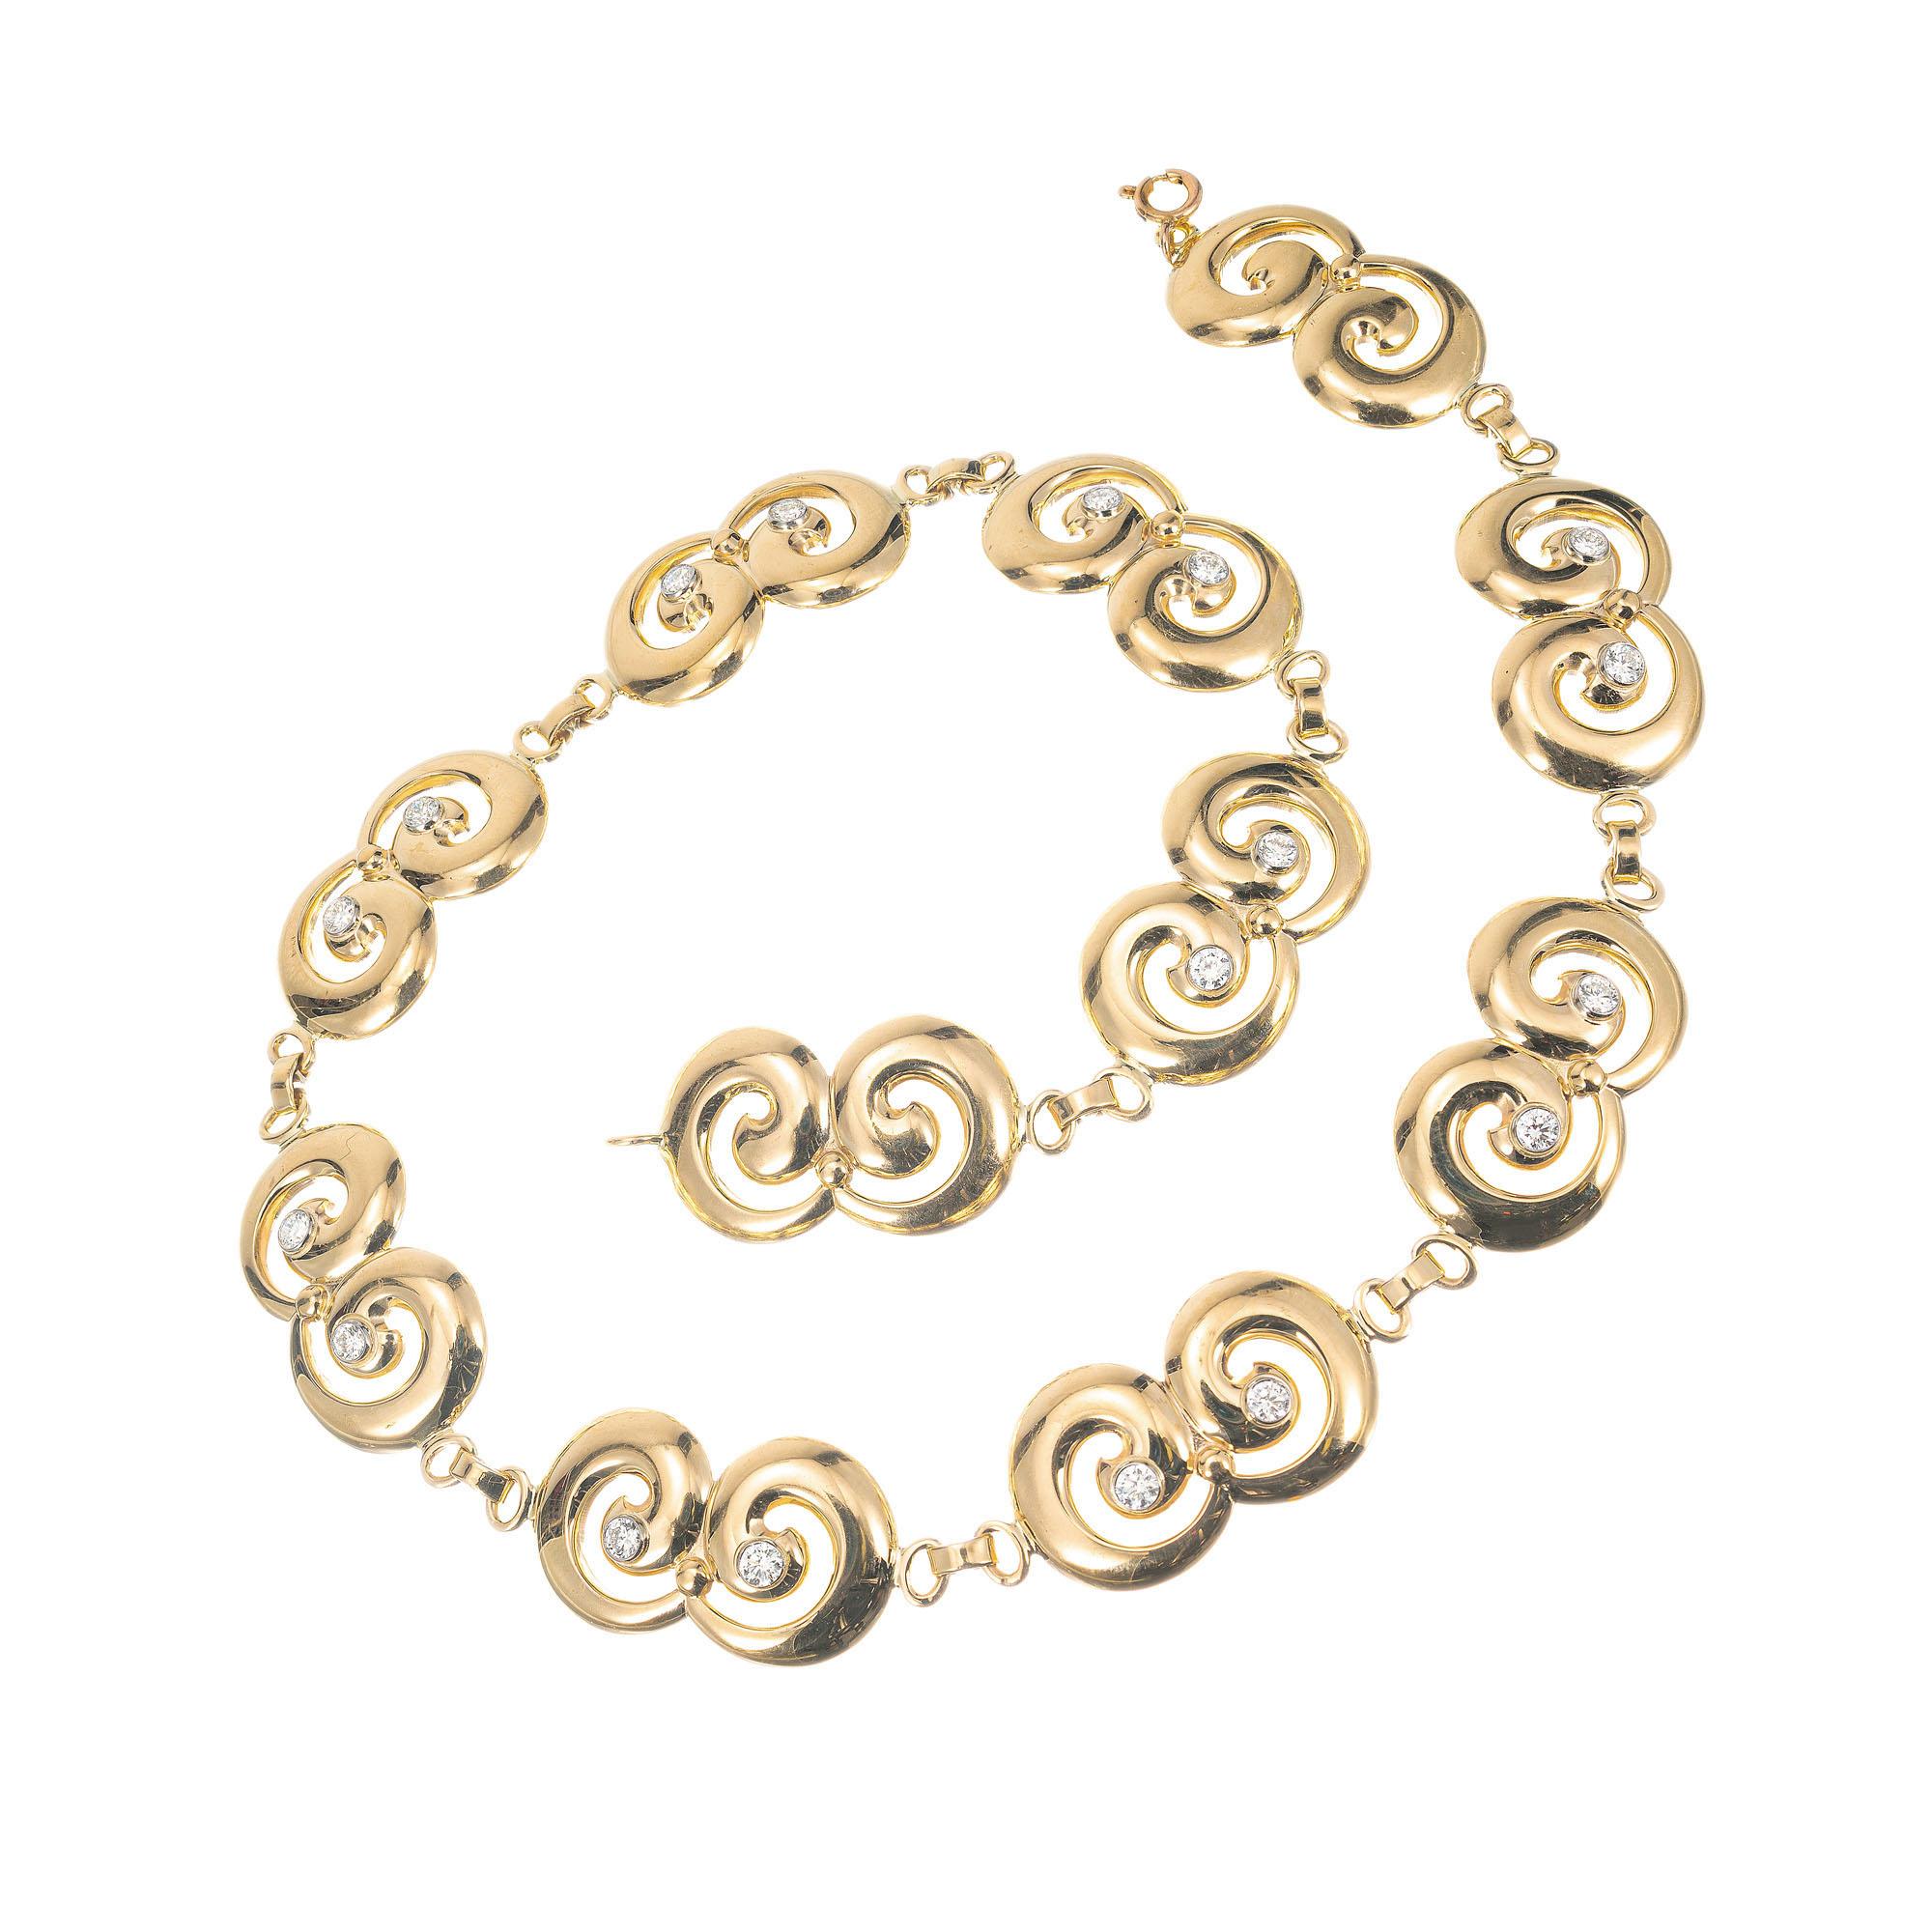 Tiffany & Co swirl link necklace in 14k yellow gold with 18 brilliant cut round tube set diamonds. 16.5 Inch length. 

18 brilliant cut diamonds, F VS approx. 1.80cts
14k yellow gold 
Platinum 
Stamped: 14k
Hallmark: Tiffany & Co
60.6 grams
Total